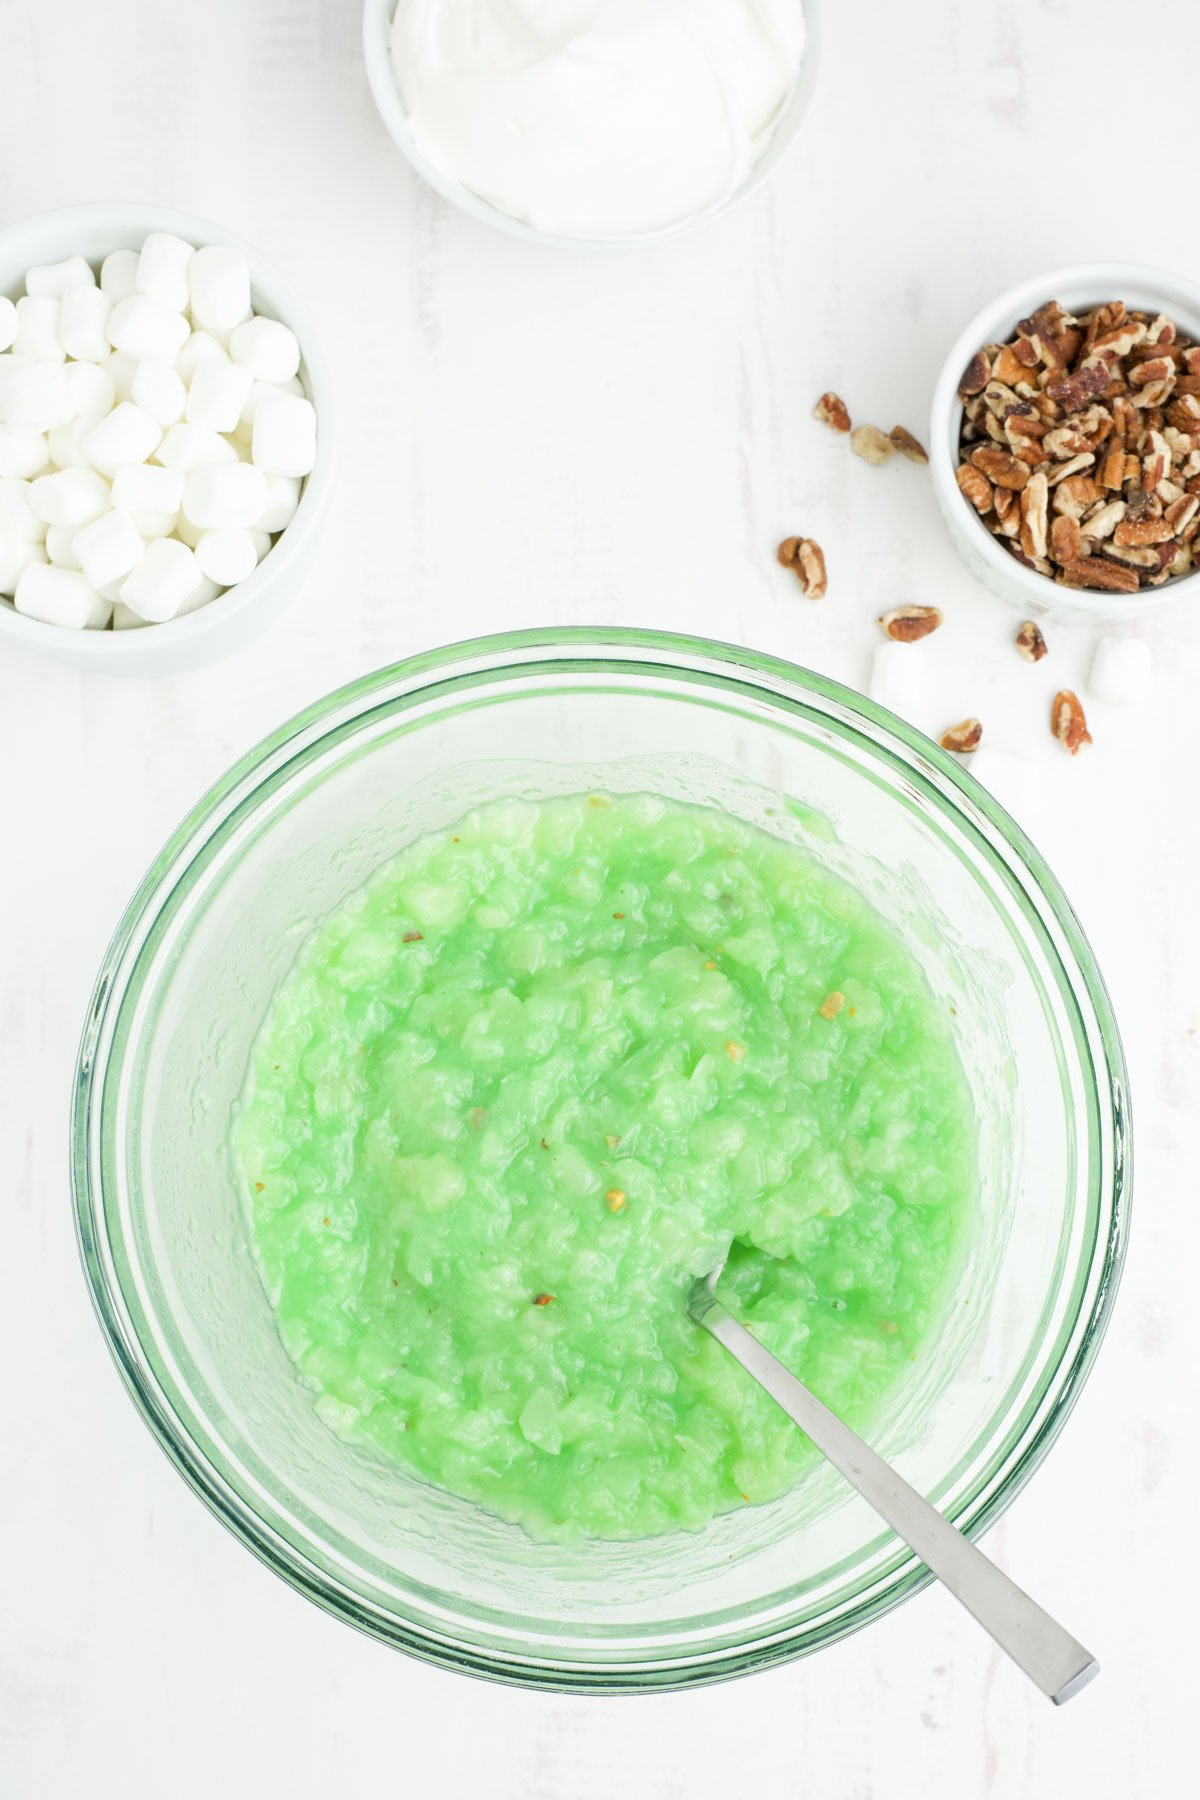 Green pistachio pudding combined with crushed pineapple.